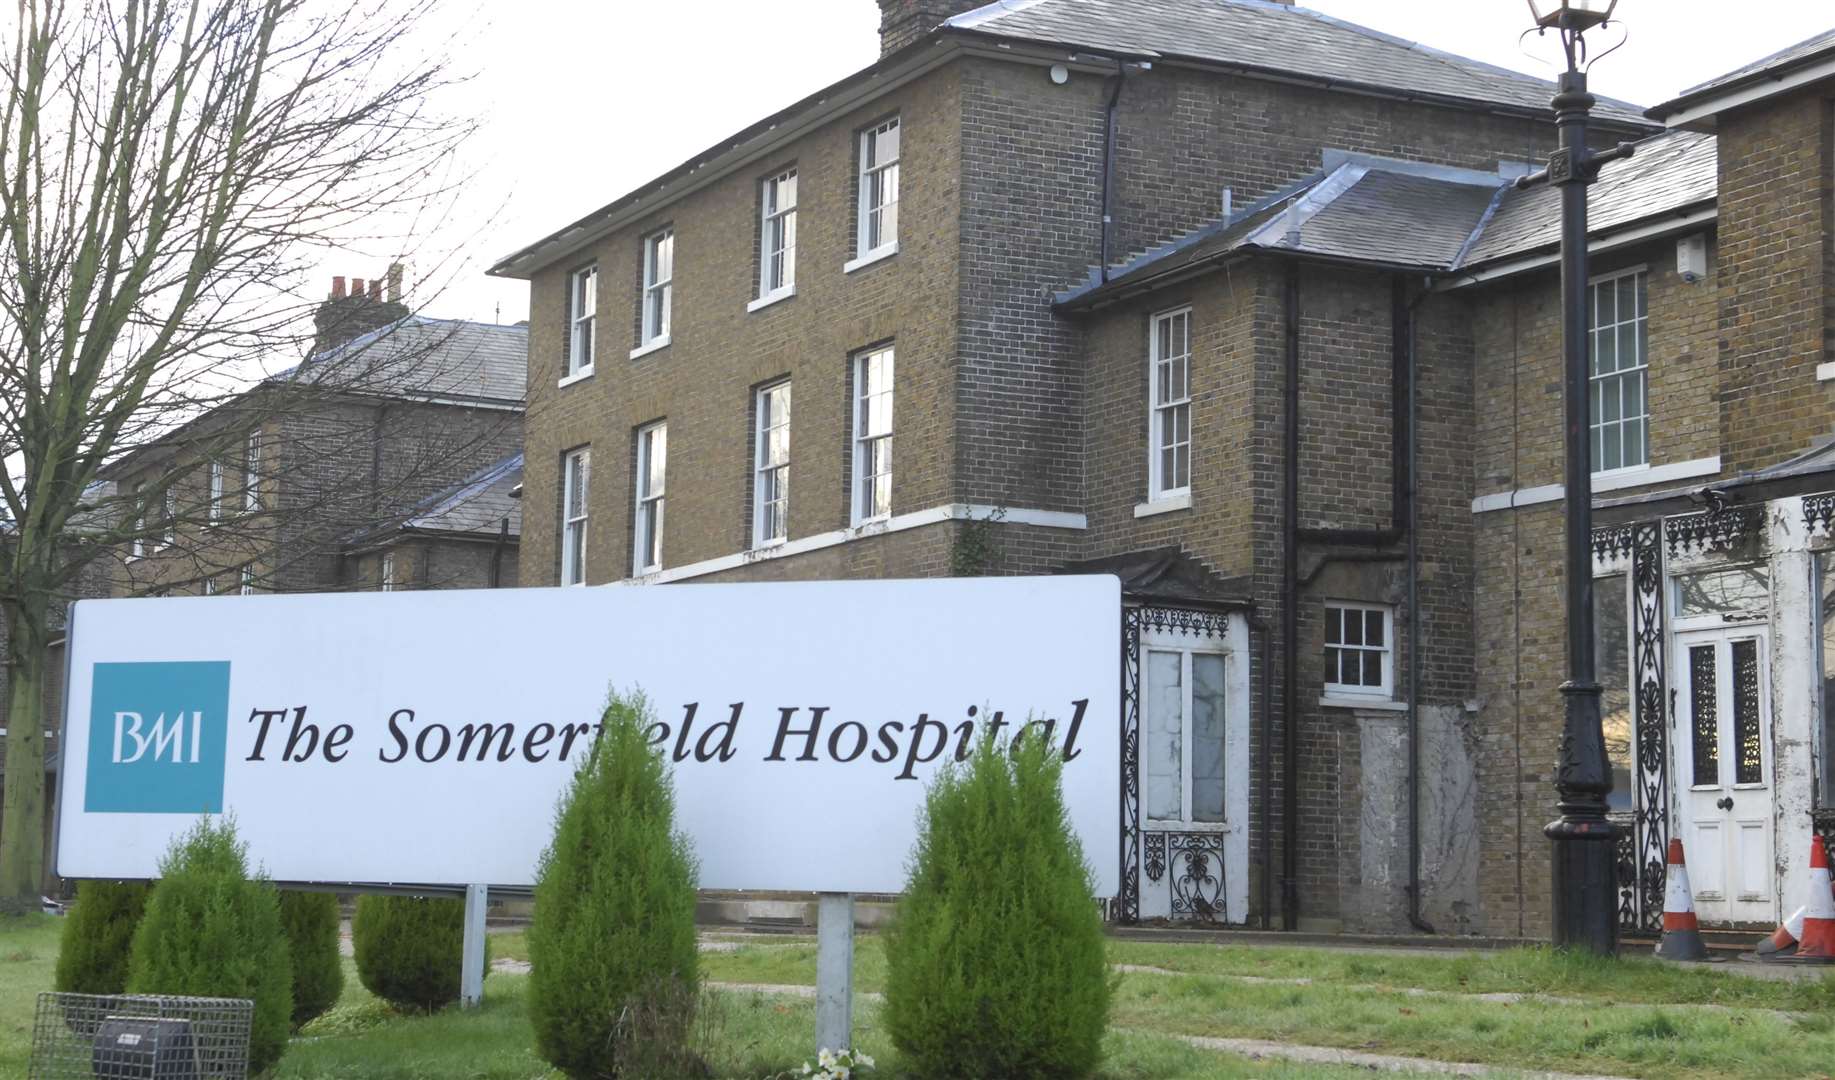 The Somerfield Hospital has closed. Picture: Martin Apps